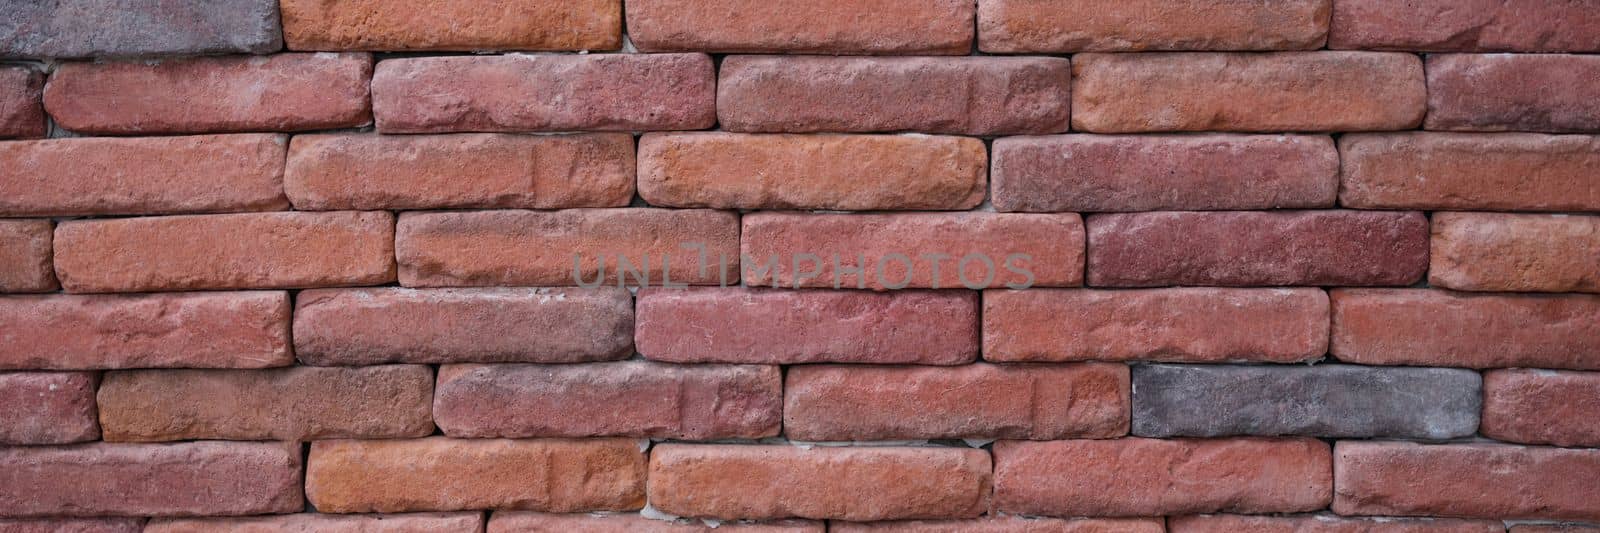 Texture of old red brick wall. Background of empty brick wall basement by kuprevich